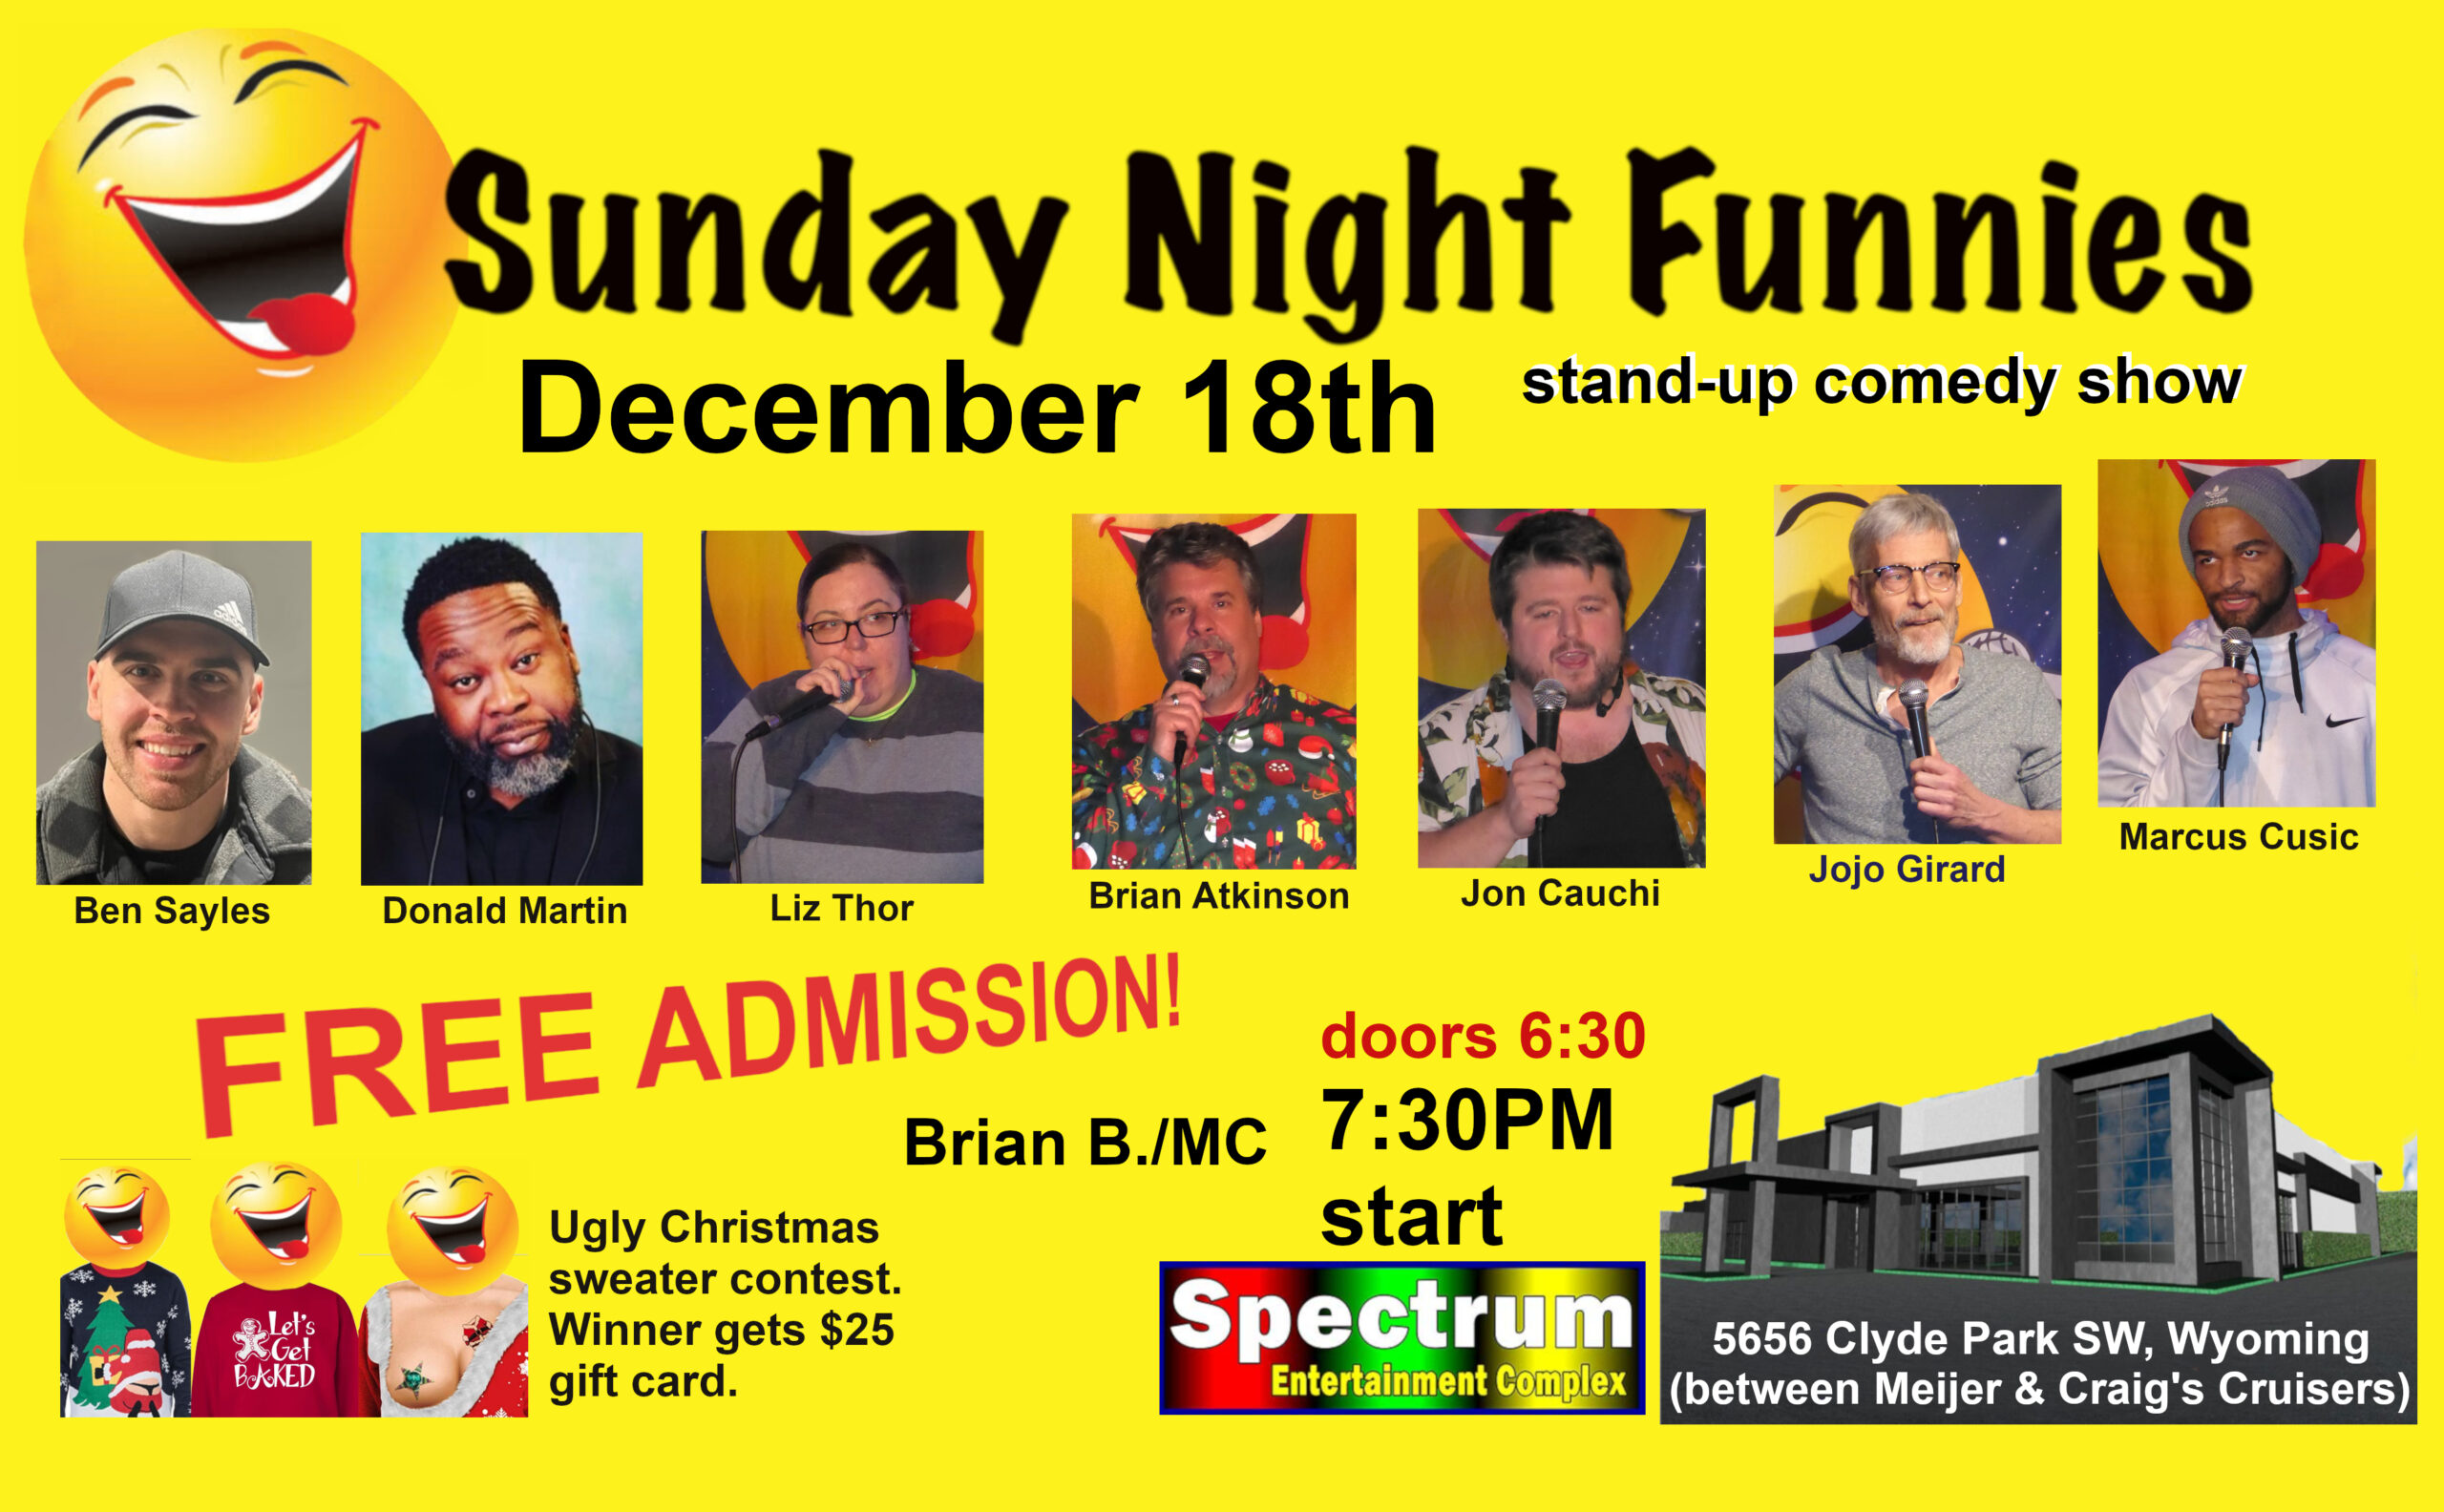 Brian Atkinson Performs in the Sunday Night Funnies